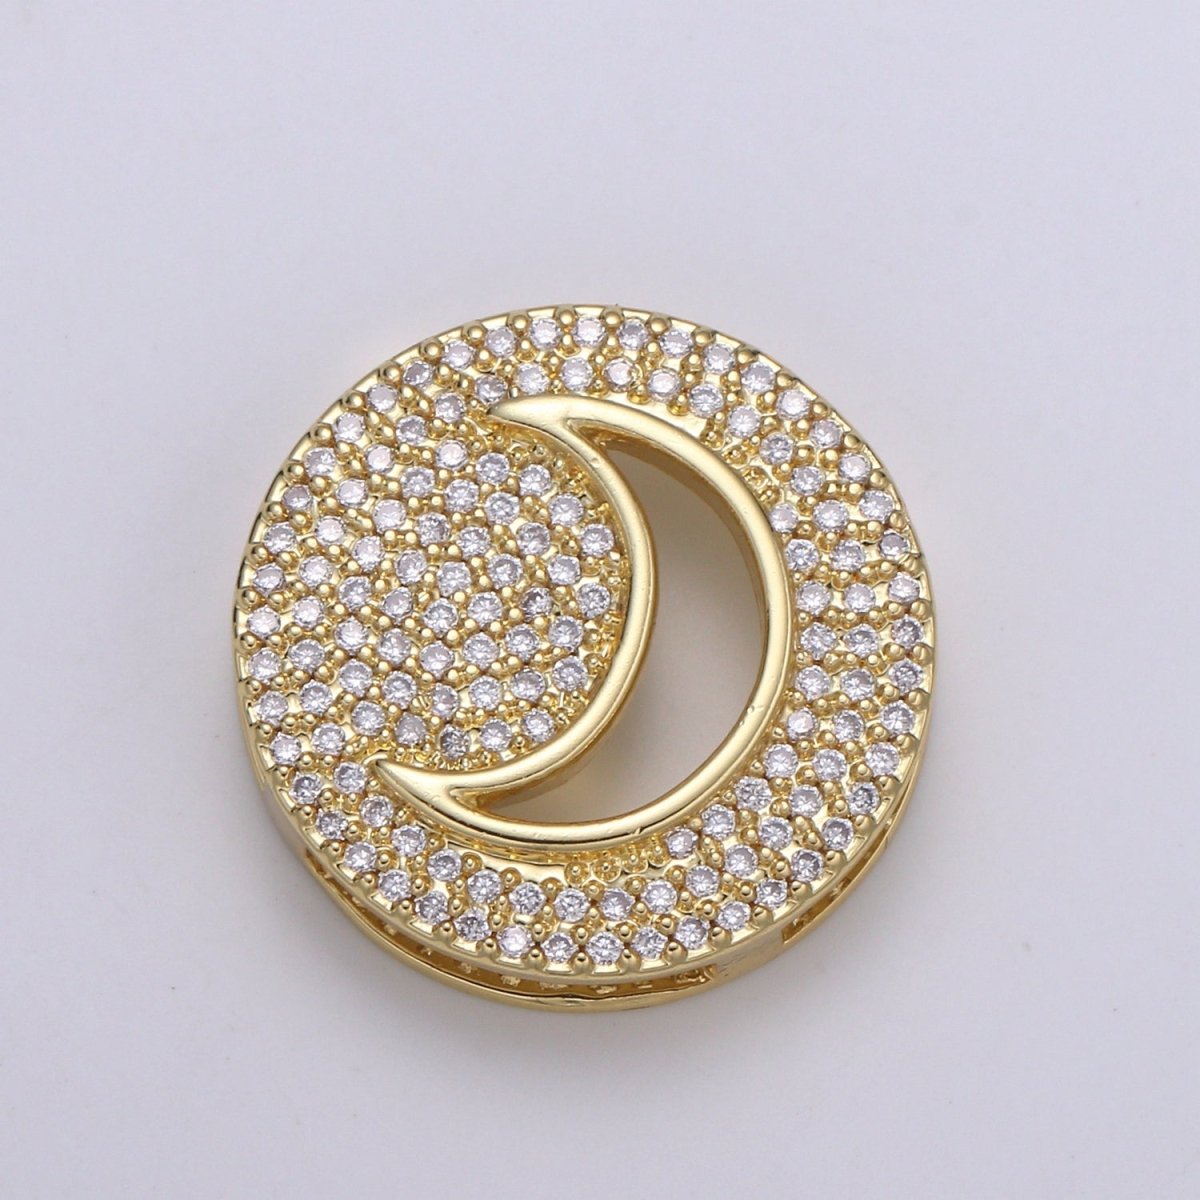 1pc 24K Gold Cresent Moon Spacer Beads, for DIY Moon, Celestial Pave Charm Bracelet Necklace Bead 19.9x4.6mm Hole 3.5mm B402 - DLUXCA